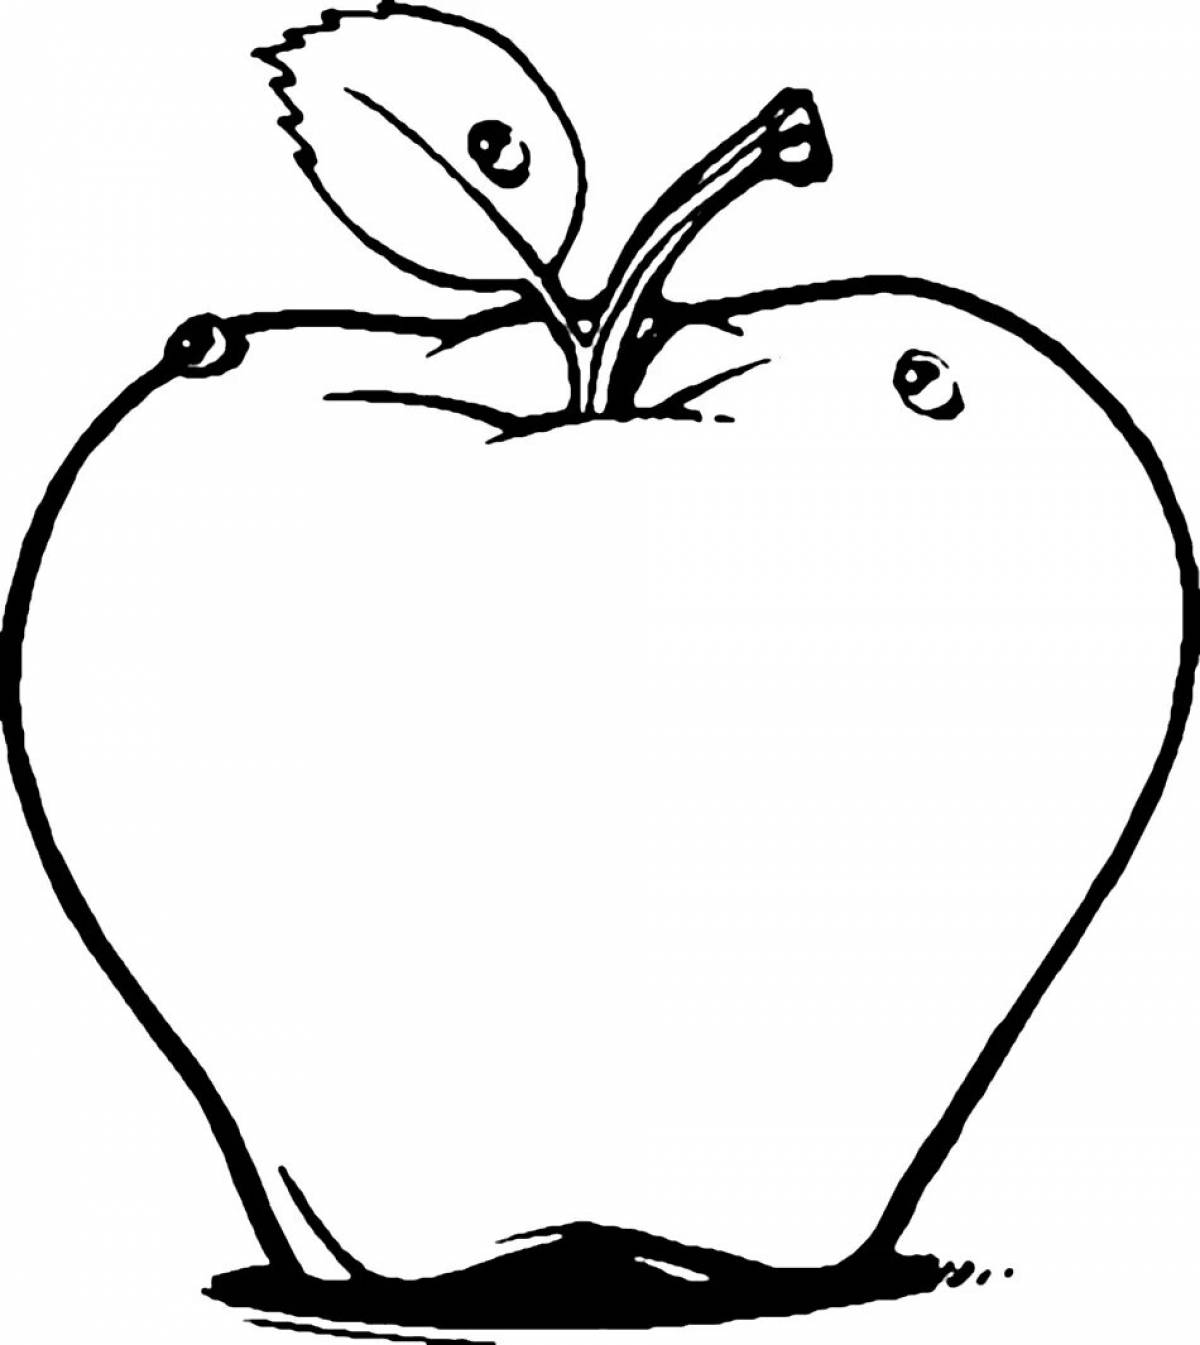 Apple drawing for kids #20